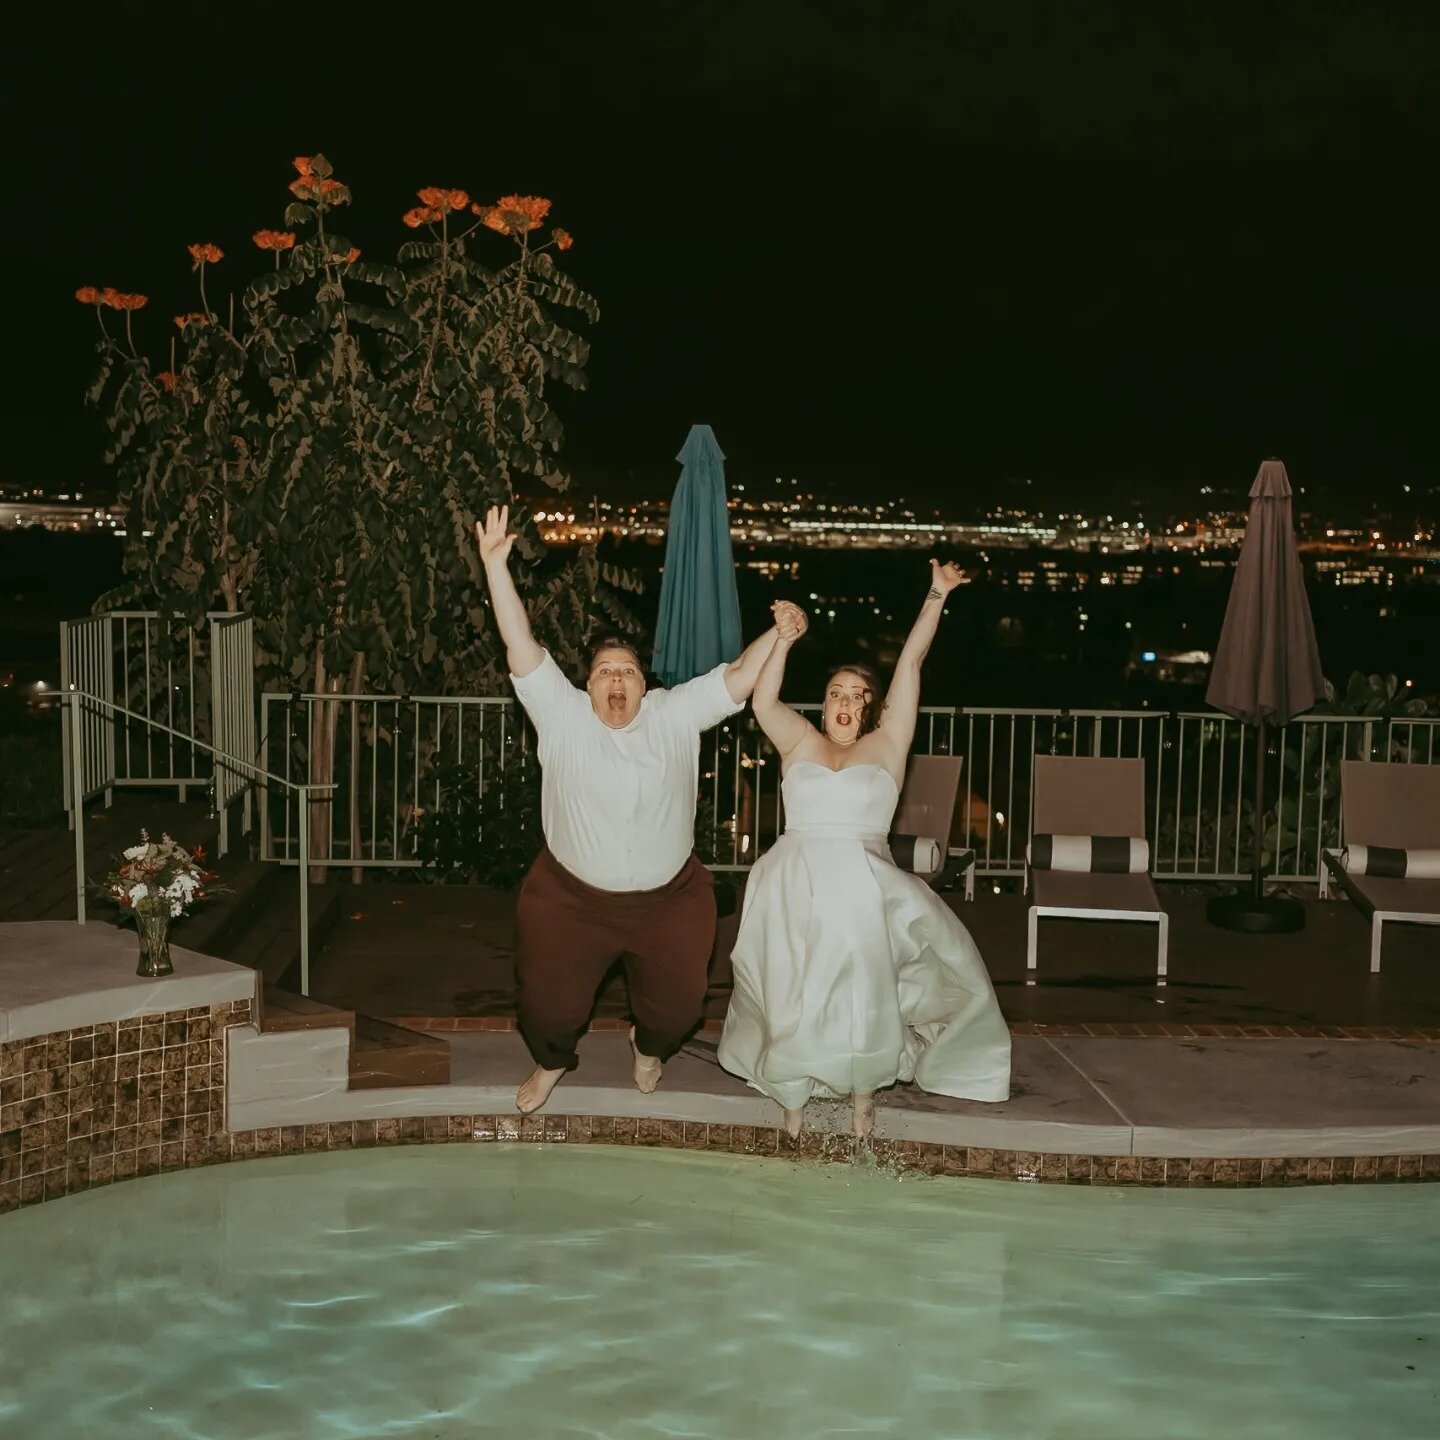 When I said this wedding was drenched in love, there was an emphasis on the drenched. 😁 You know I love a good jumping photo, so jumping into the pool? Don't even get me started.

#lifestylephotographer #couplesphotographer #socalphotographer #sandi